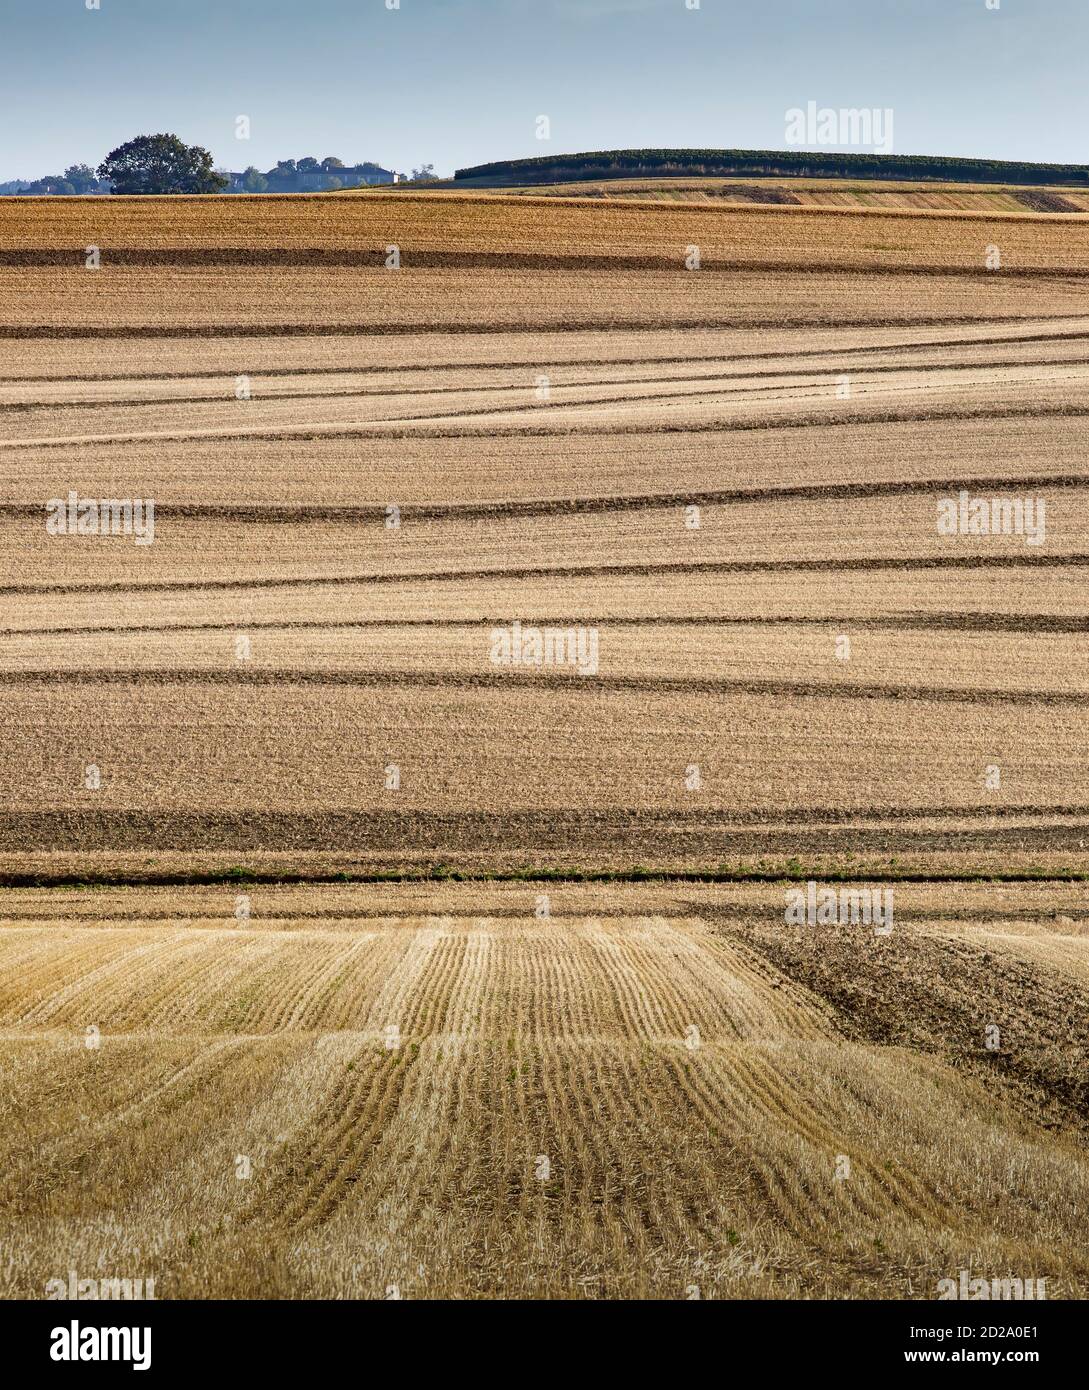 A farming landscape of gently rolling hills that are typical of The Gers region of South West France. Stock Photo